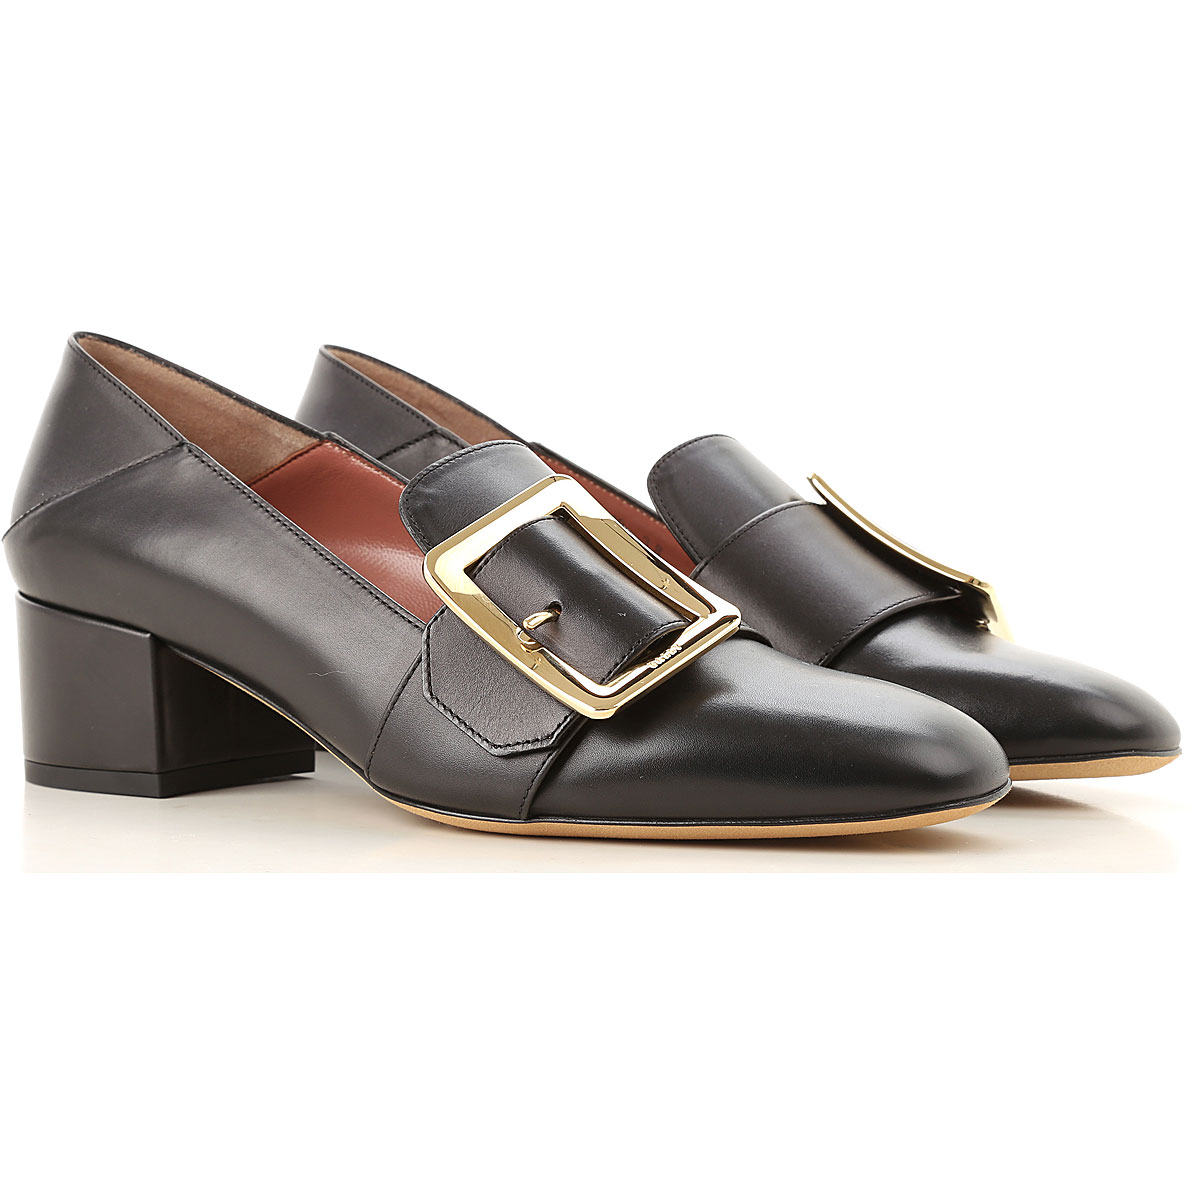 Womens Shoes Bally, Style code: janelle-0100-6222757